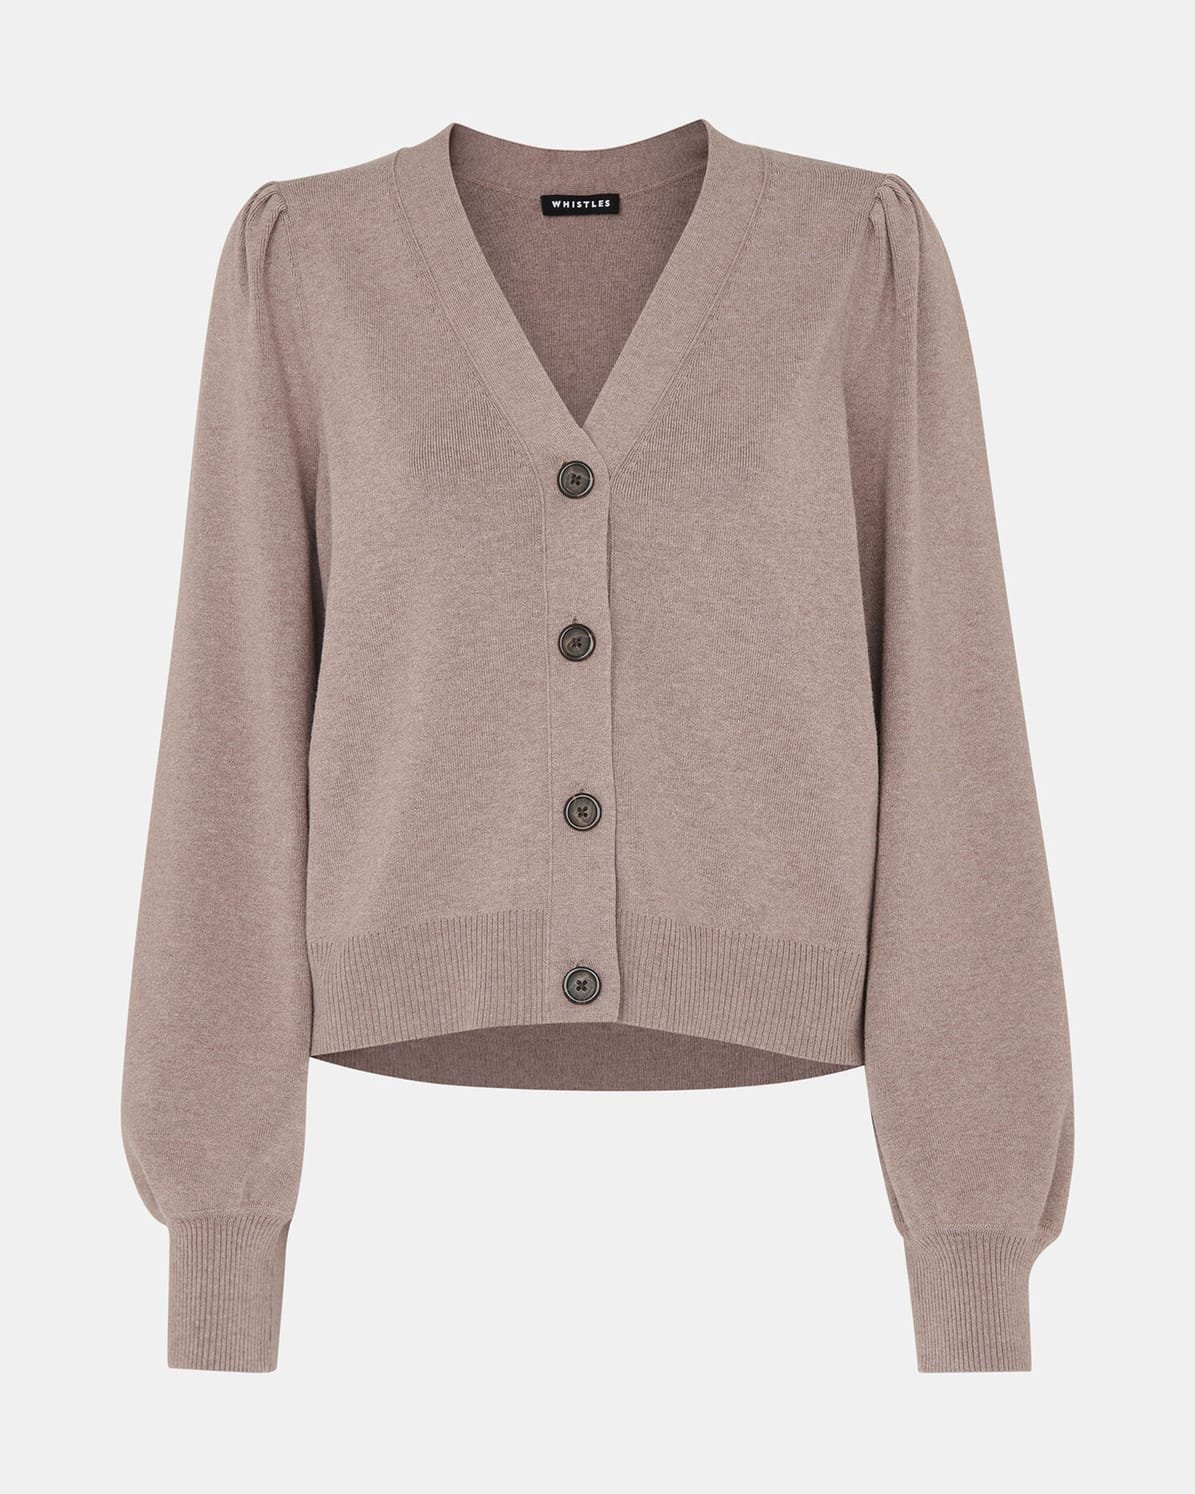 WHISTLES Neutral Puff Sleeve Cardigan in Neutral